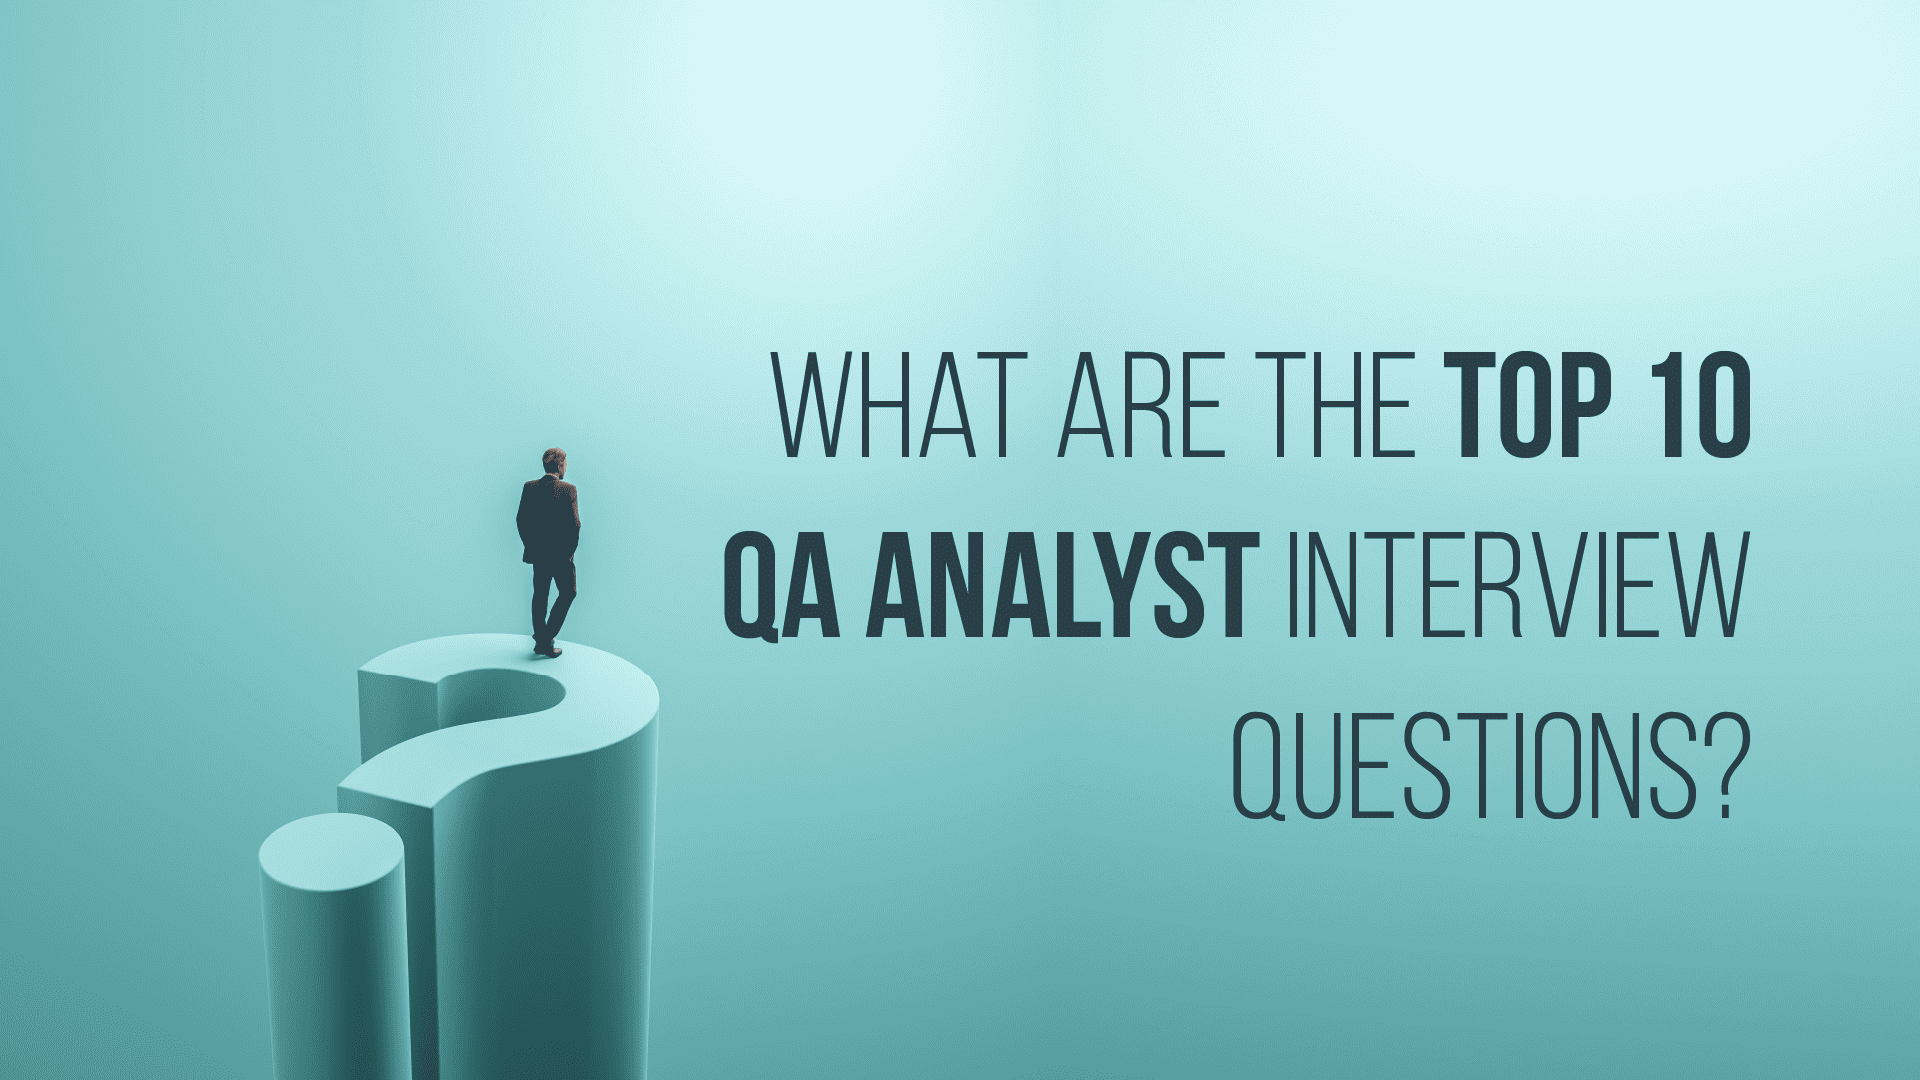 What Are the Top 10 QA Analyst Interview Questions?